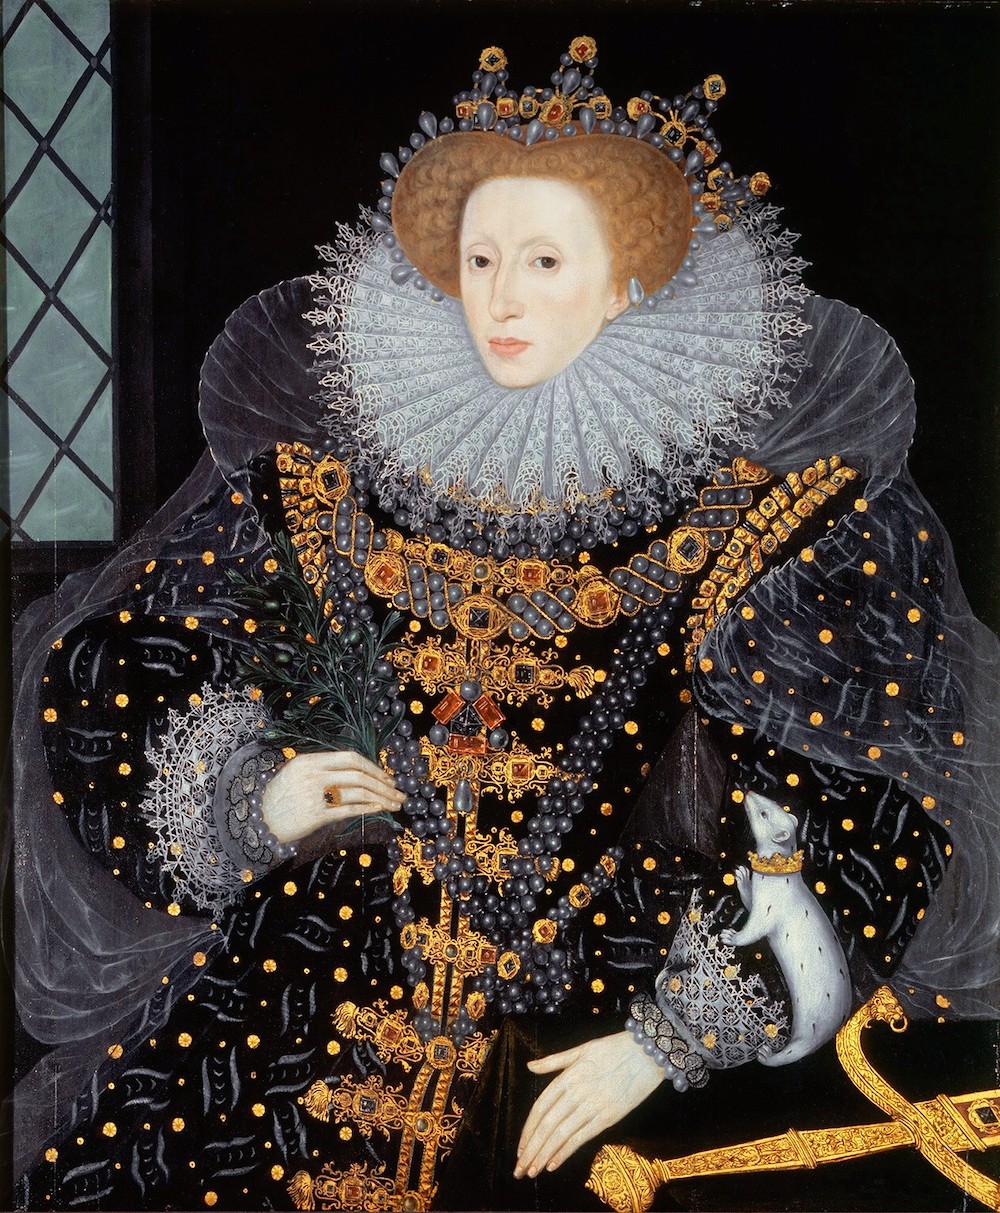 Painting of Elizabeth I of England, also known as the Ermine Portrait. Elizabeth is wearing a richly decorated black dress and The Three Brothers jewel.